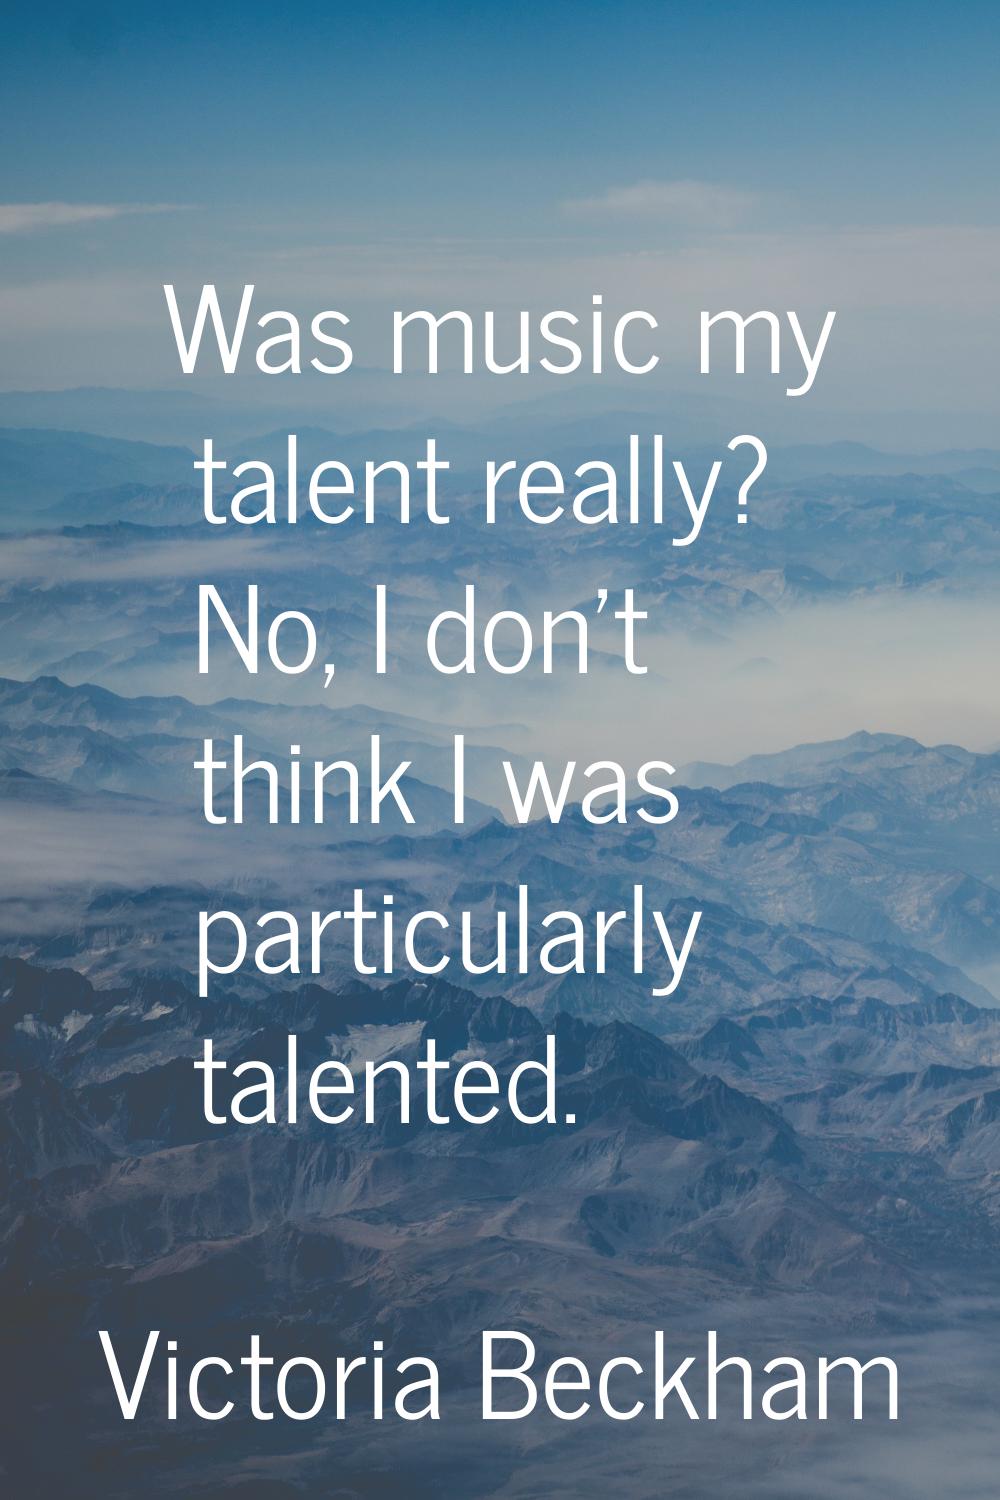 Was music my talent really? No, I don't think I was particularly talented.